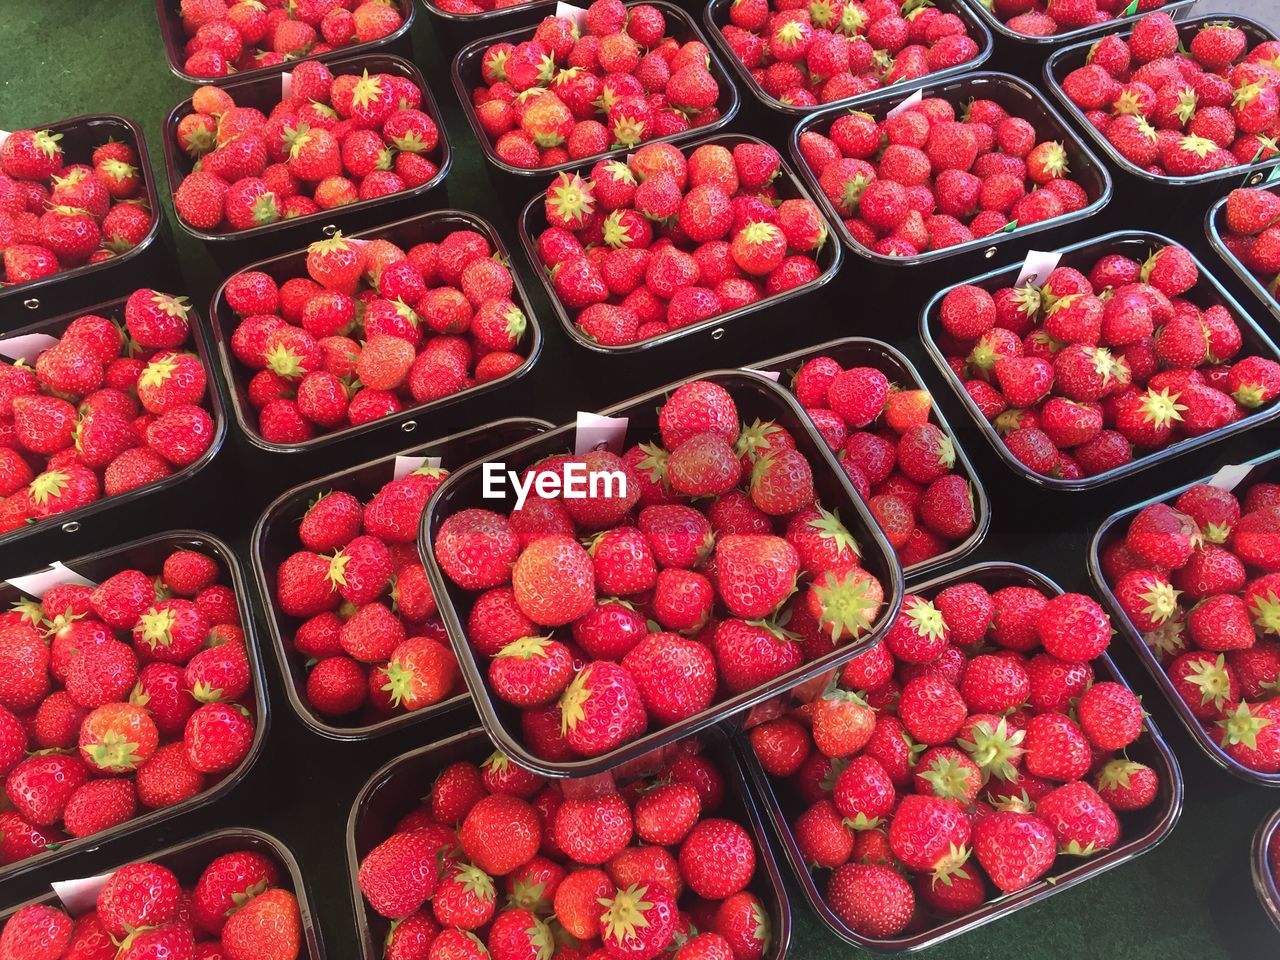 HIGH ANGLE VIEW OF STRAWBERRIES IN MARKET FOR SALE